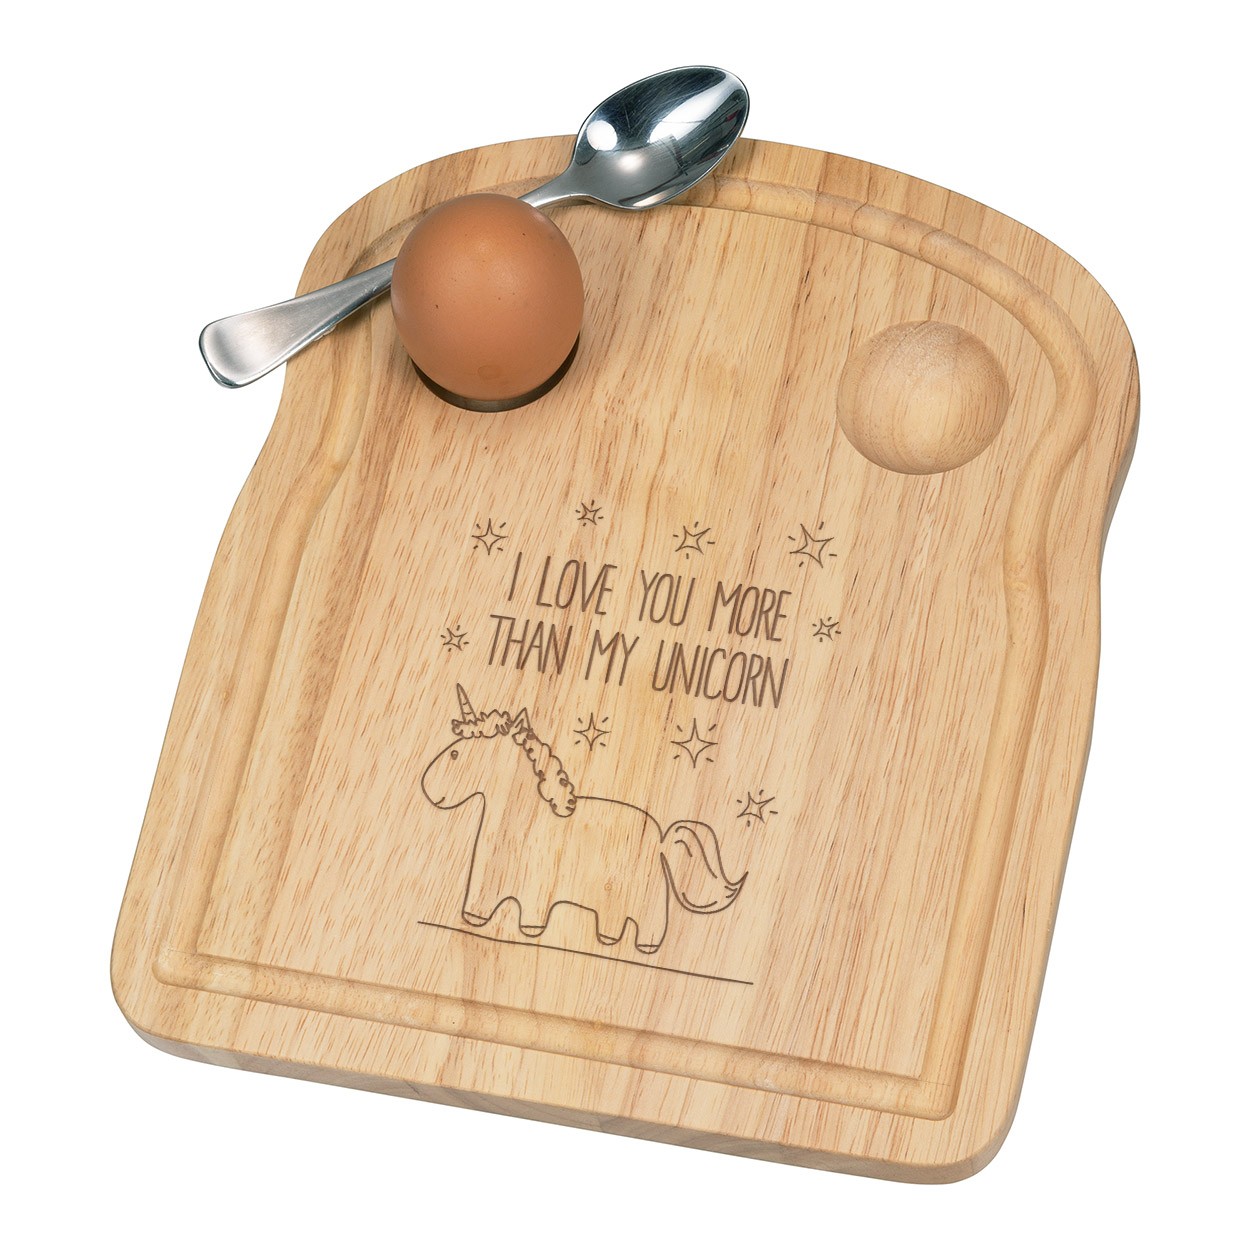 Lila I Love You More Than My Unicorn Breakfast Dippy Egg Cup Board Wooden